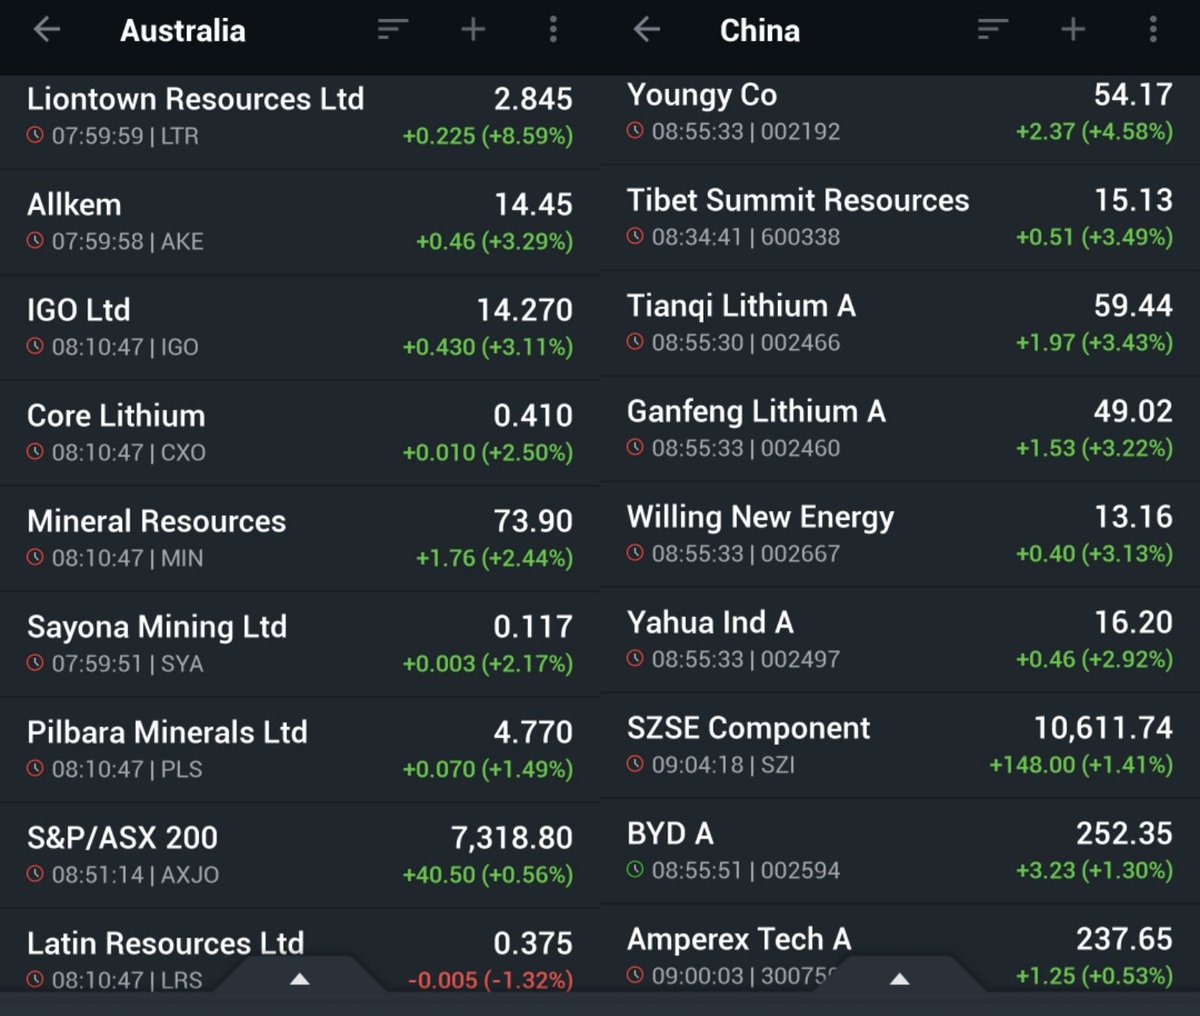 Green beginning of the week for #lithiumstocks on potential $LTR acquisition by $ALB and increase of general market sentiment in China after latest stock market support measures.
#asxstocks #chinesestocks